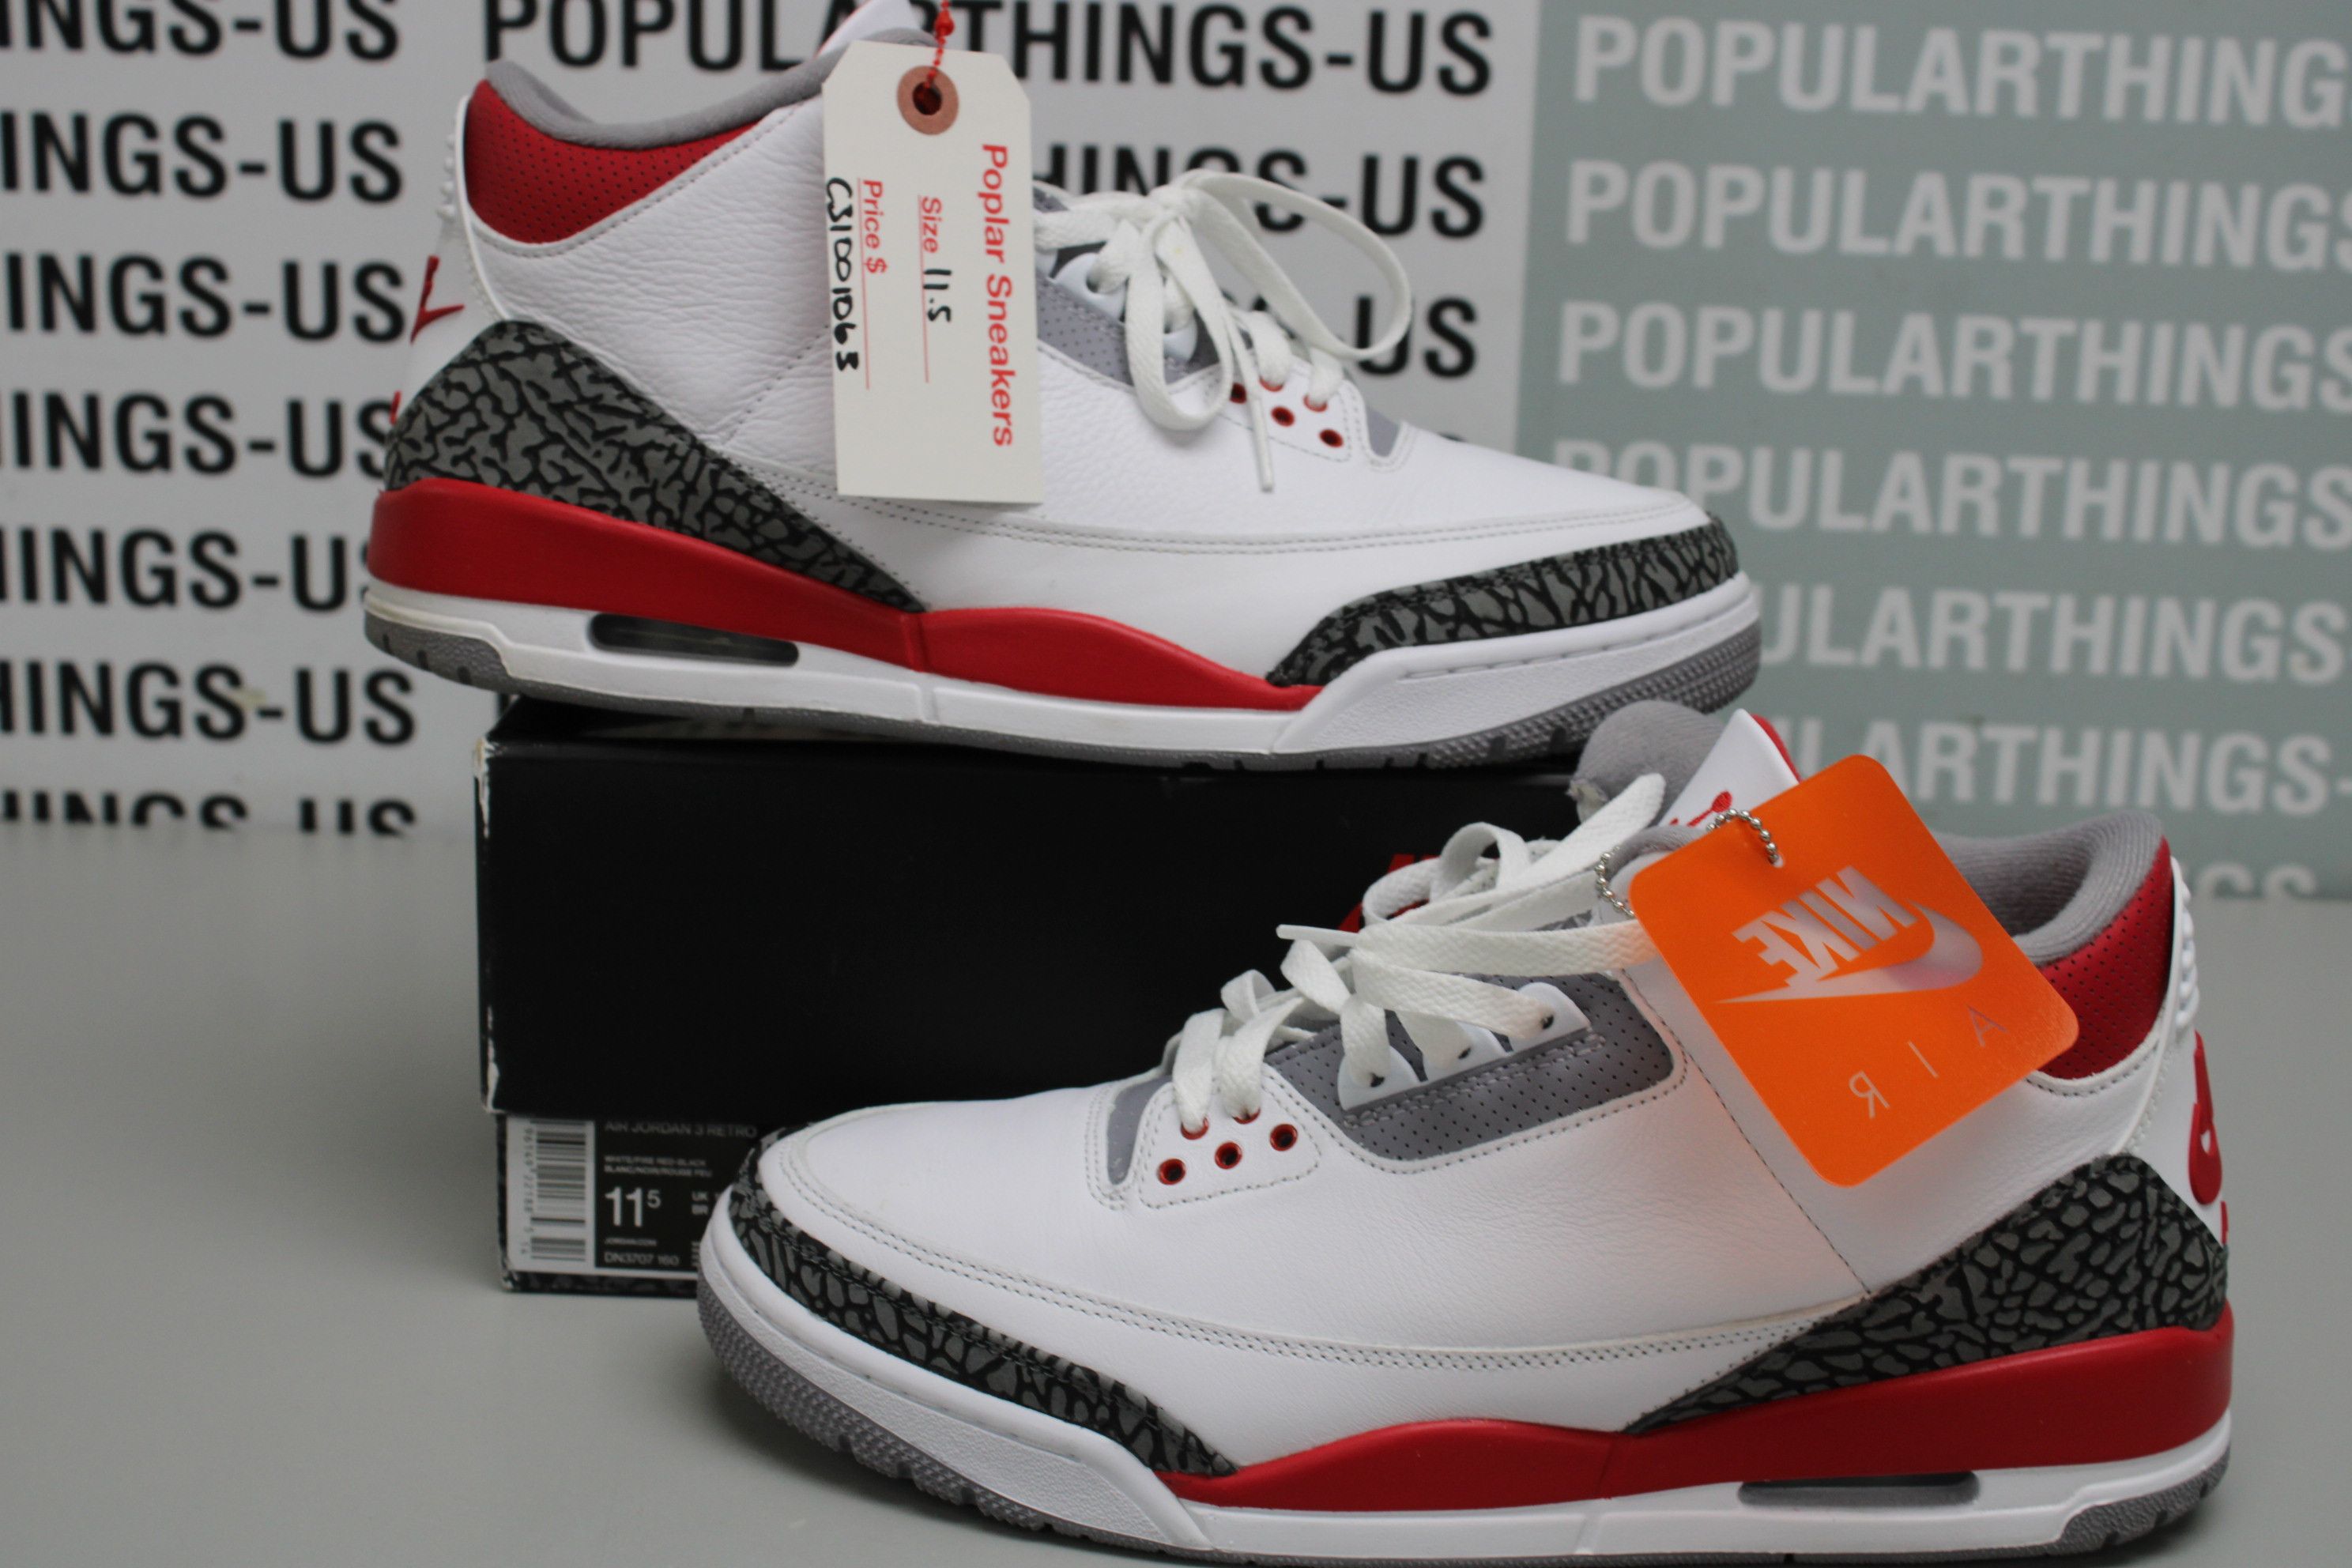 Pre-owned Jordan Brand Air Jordan 3 Retro Fire Red Size 11.5 Shoes In White